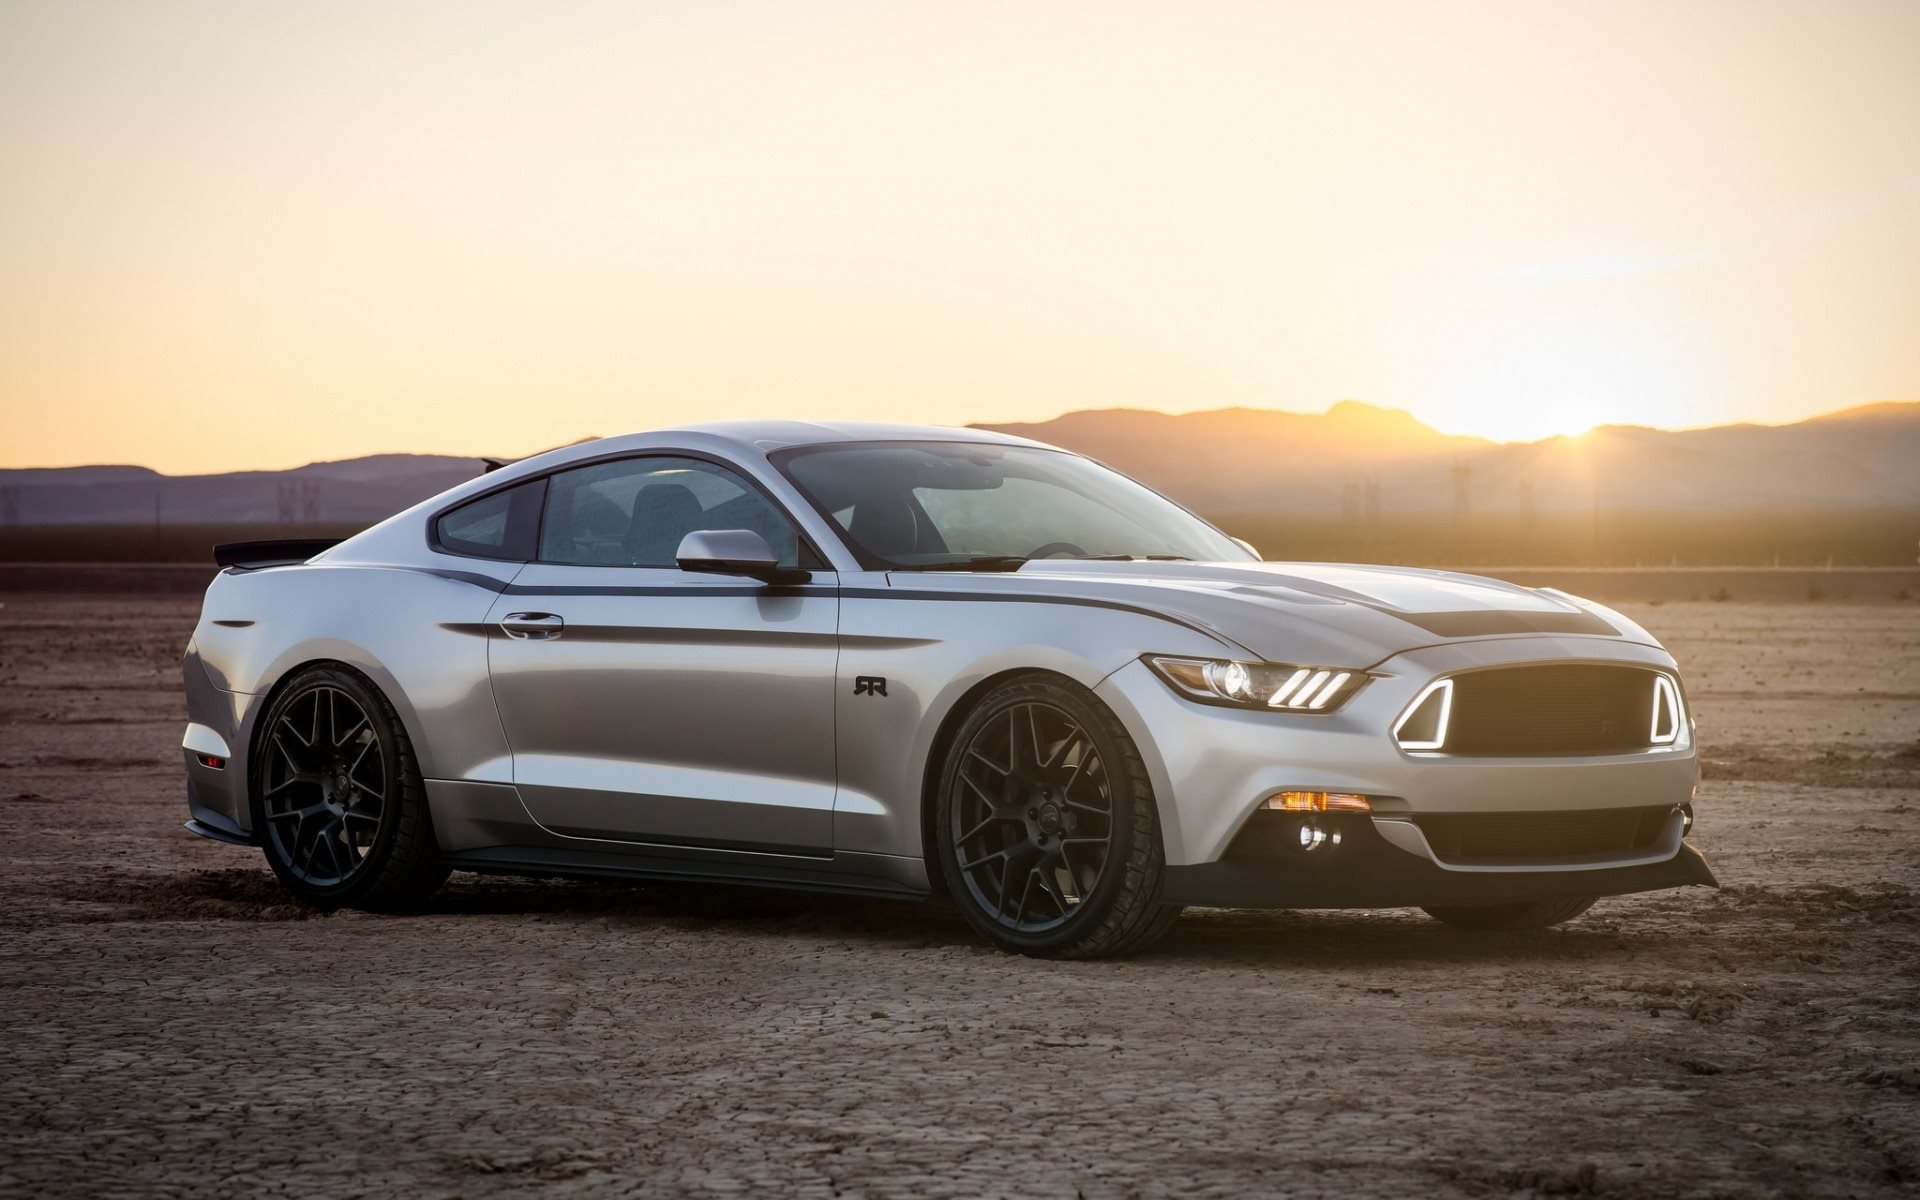 Ford Mustang Gt Rtr Tuning - HD Wallpaper 